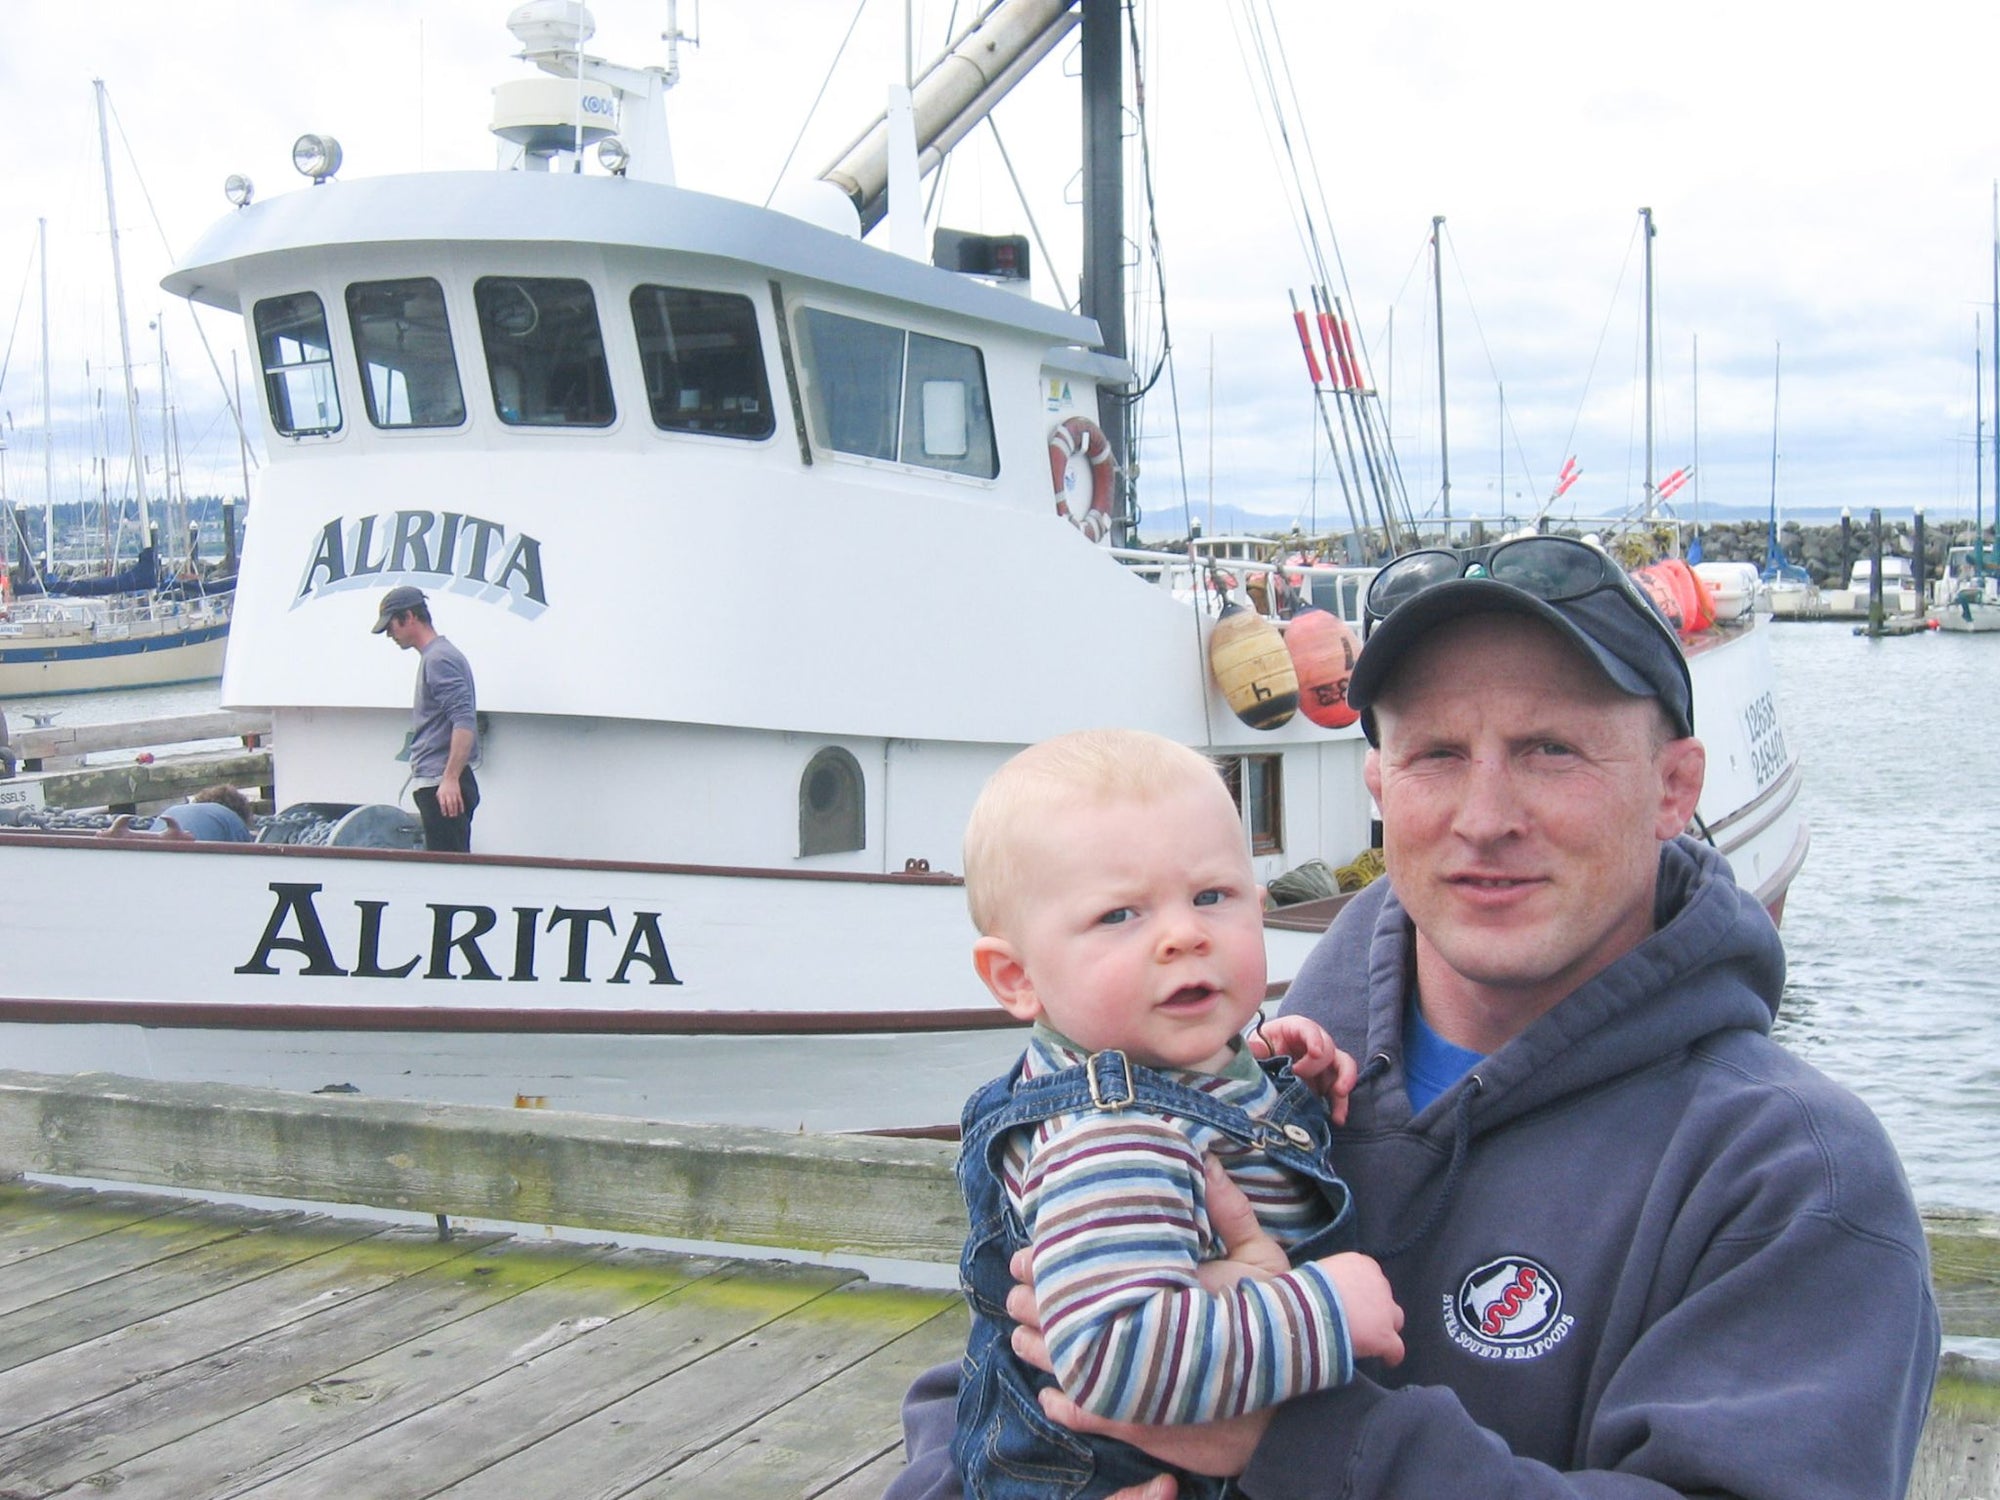 Rich Wheeler, standing in front of the Alrita fishing boat holding baby Hugh